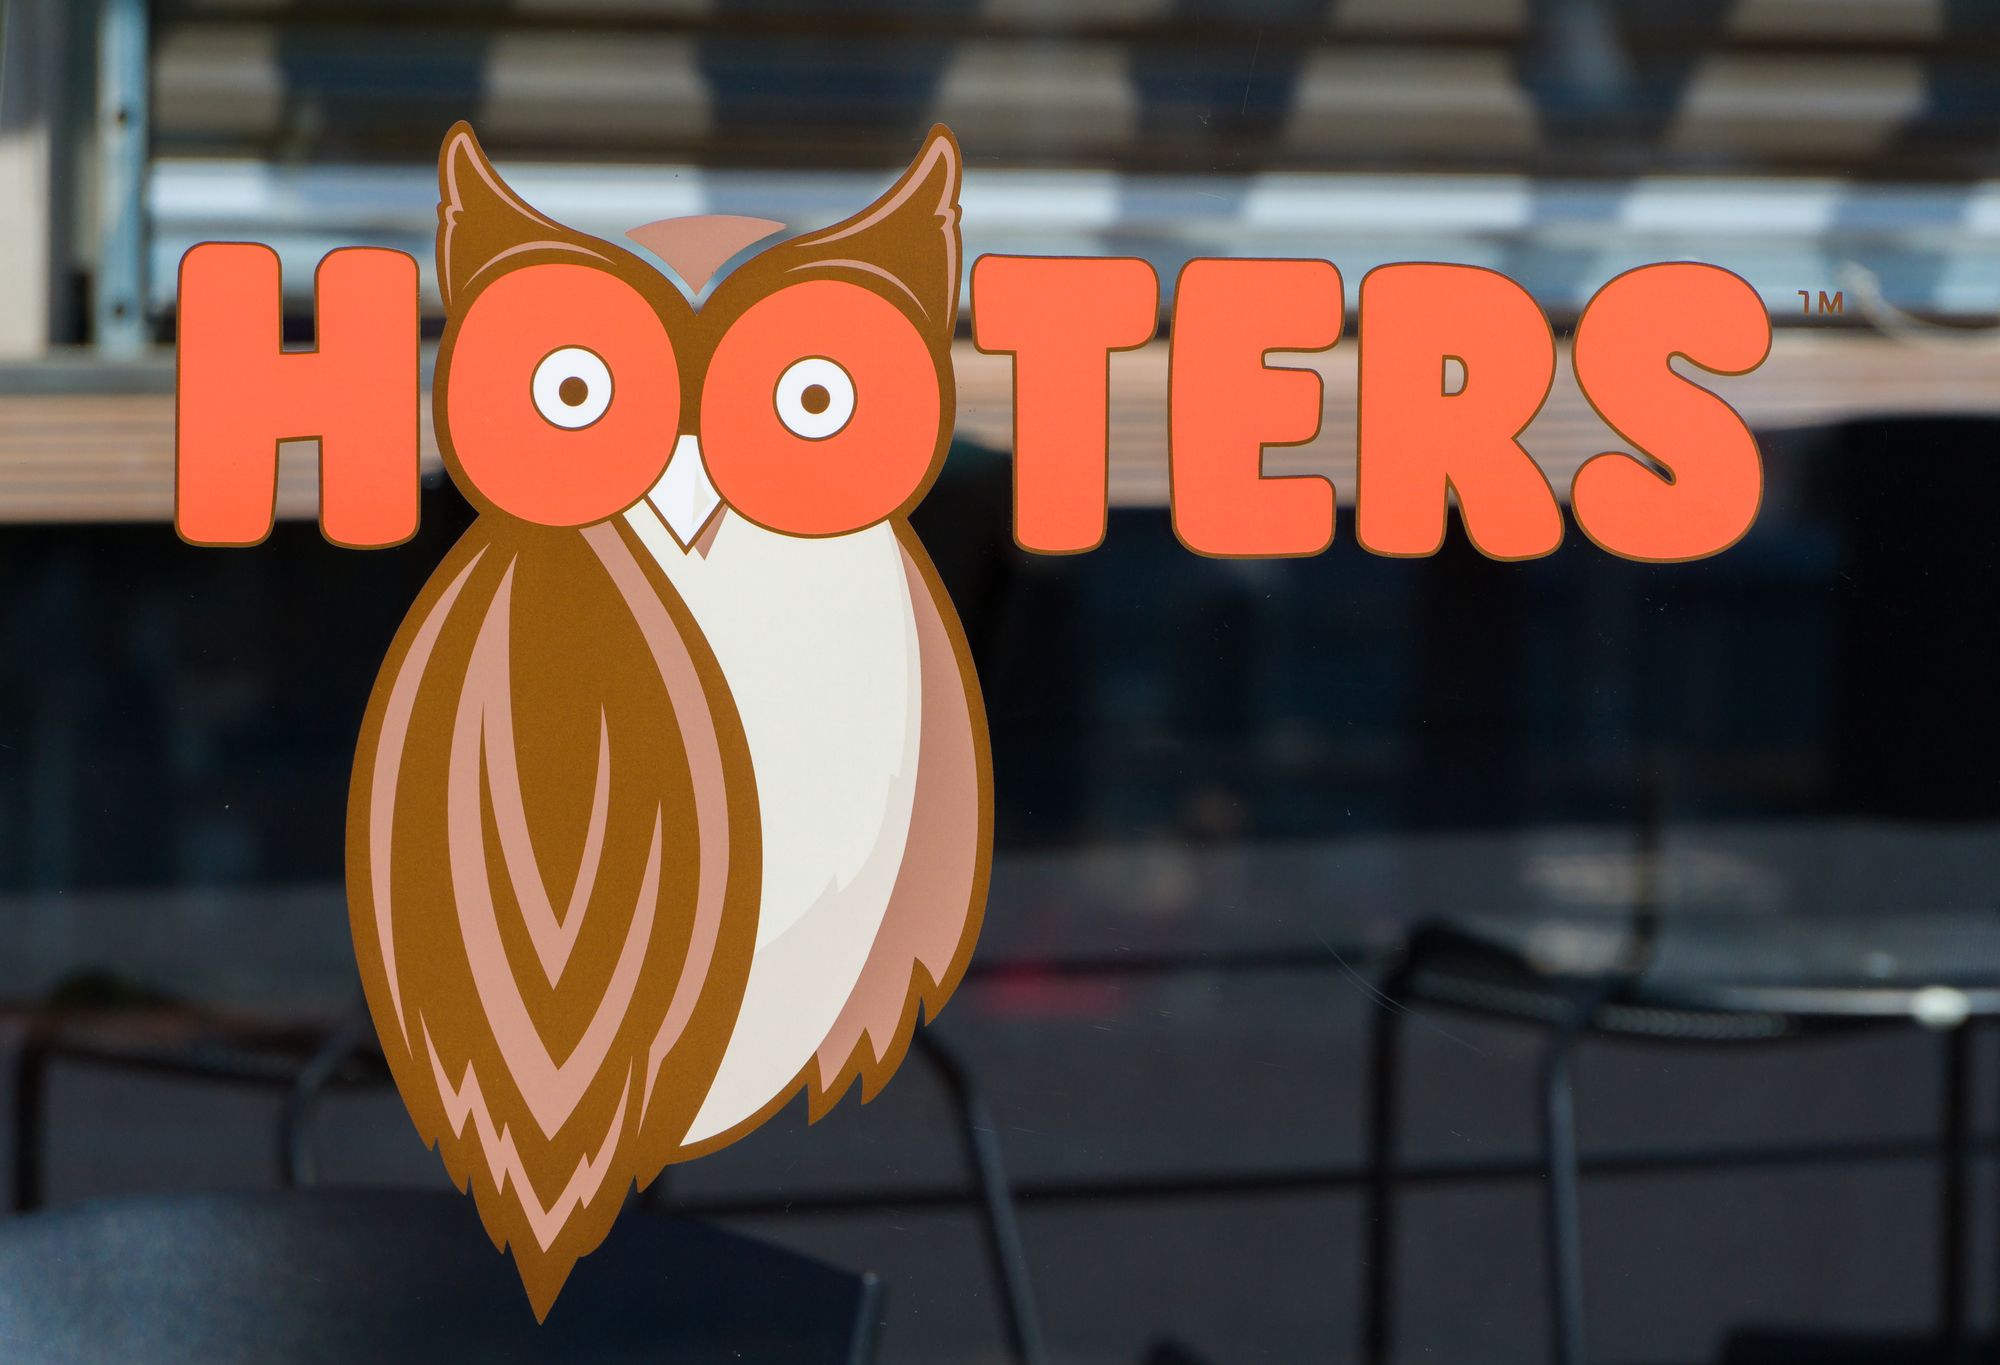 LONG BEACH, CA/USA - MARCH 19, 2016: Hooters exterior and logo. Hooters is a casual dining restaurant chain in the United States.